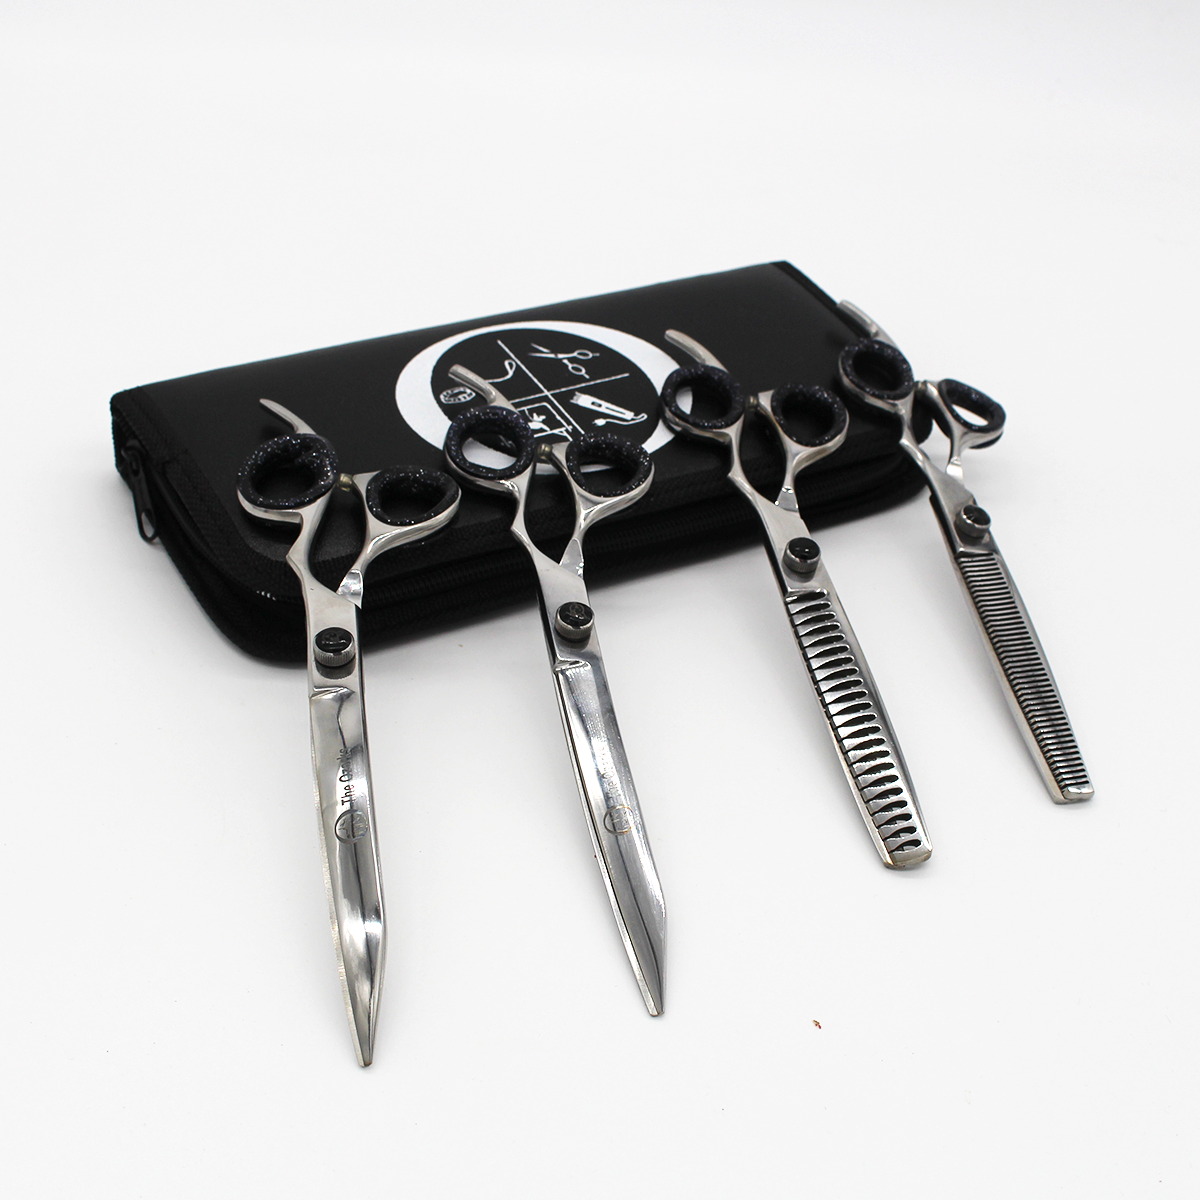 Loyalty Pet Products “Obarks” Limited Edition 8″ 4 Piece Shear Set